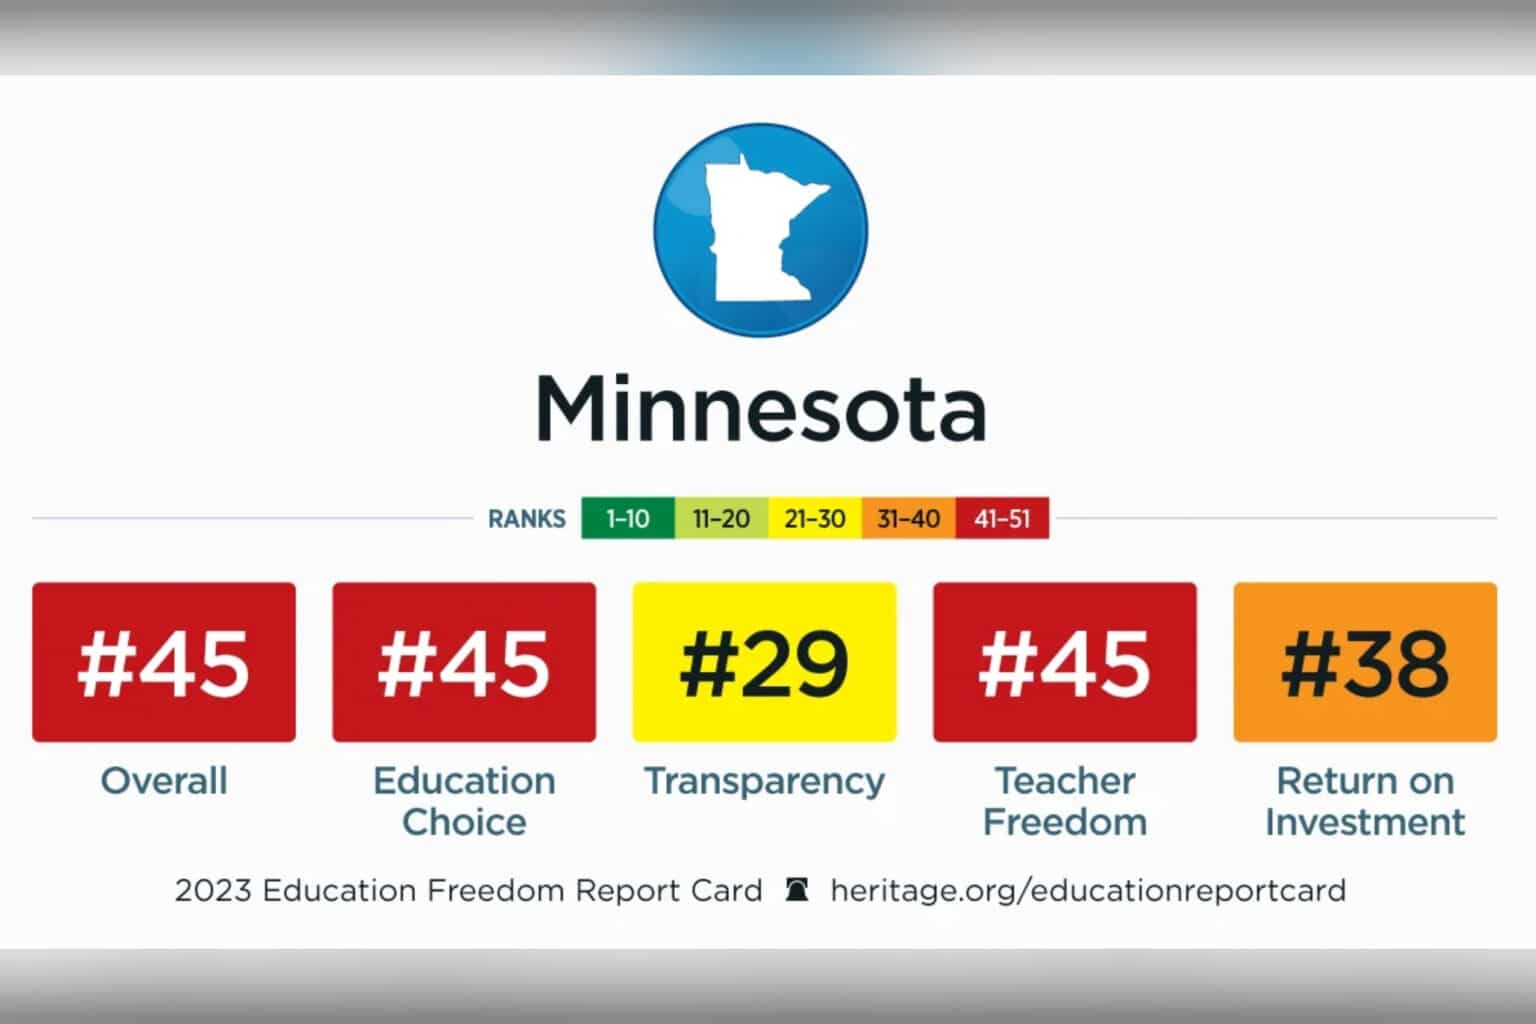 Minnesota one of the worst states for education freedom, report says